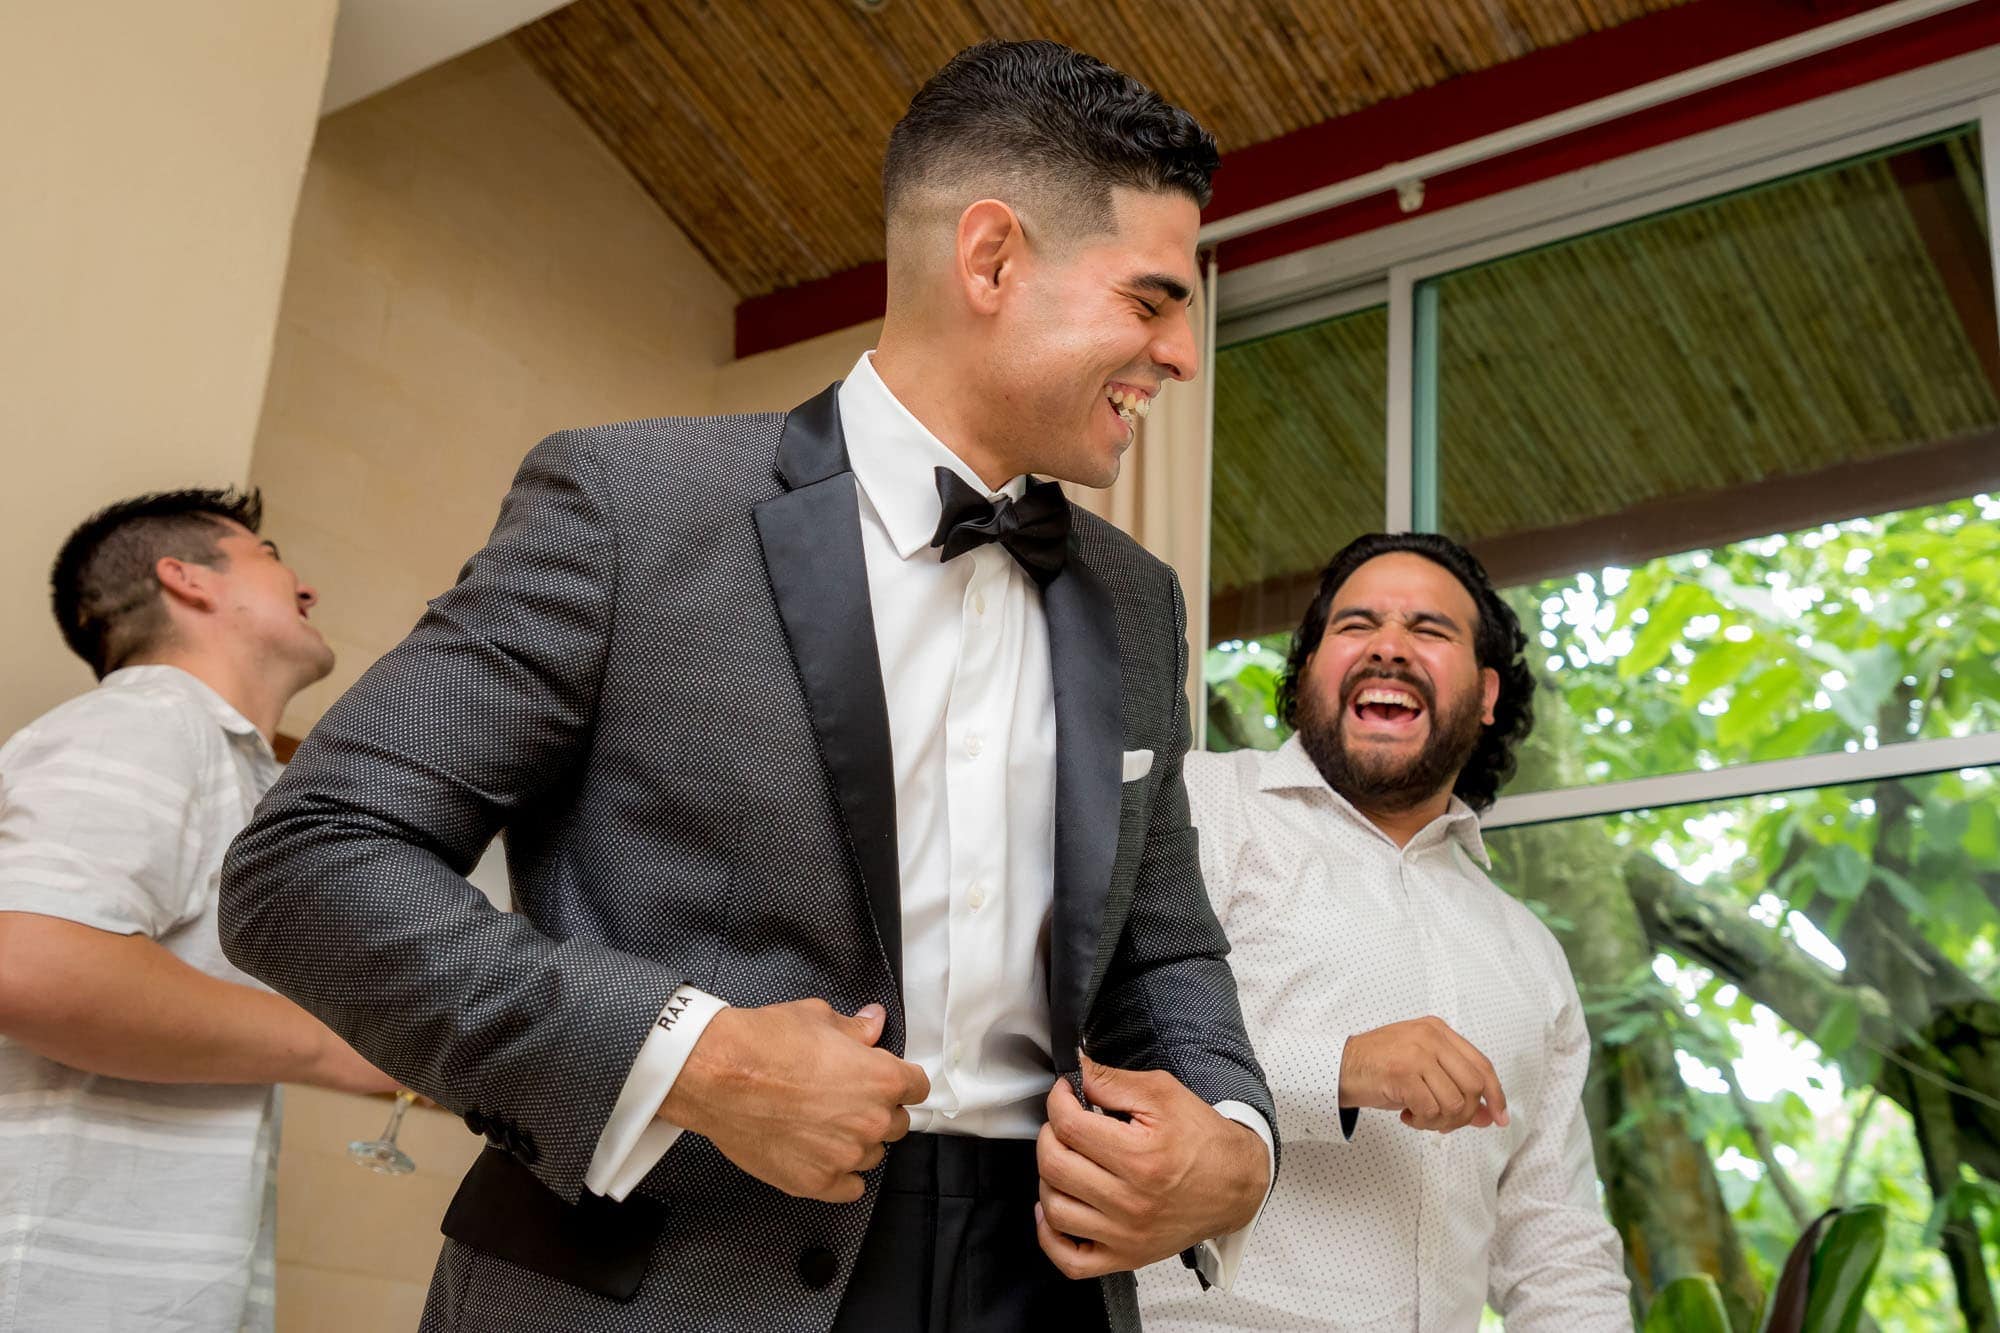 The groom laughing with a friend